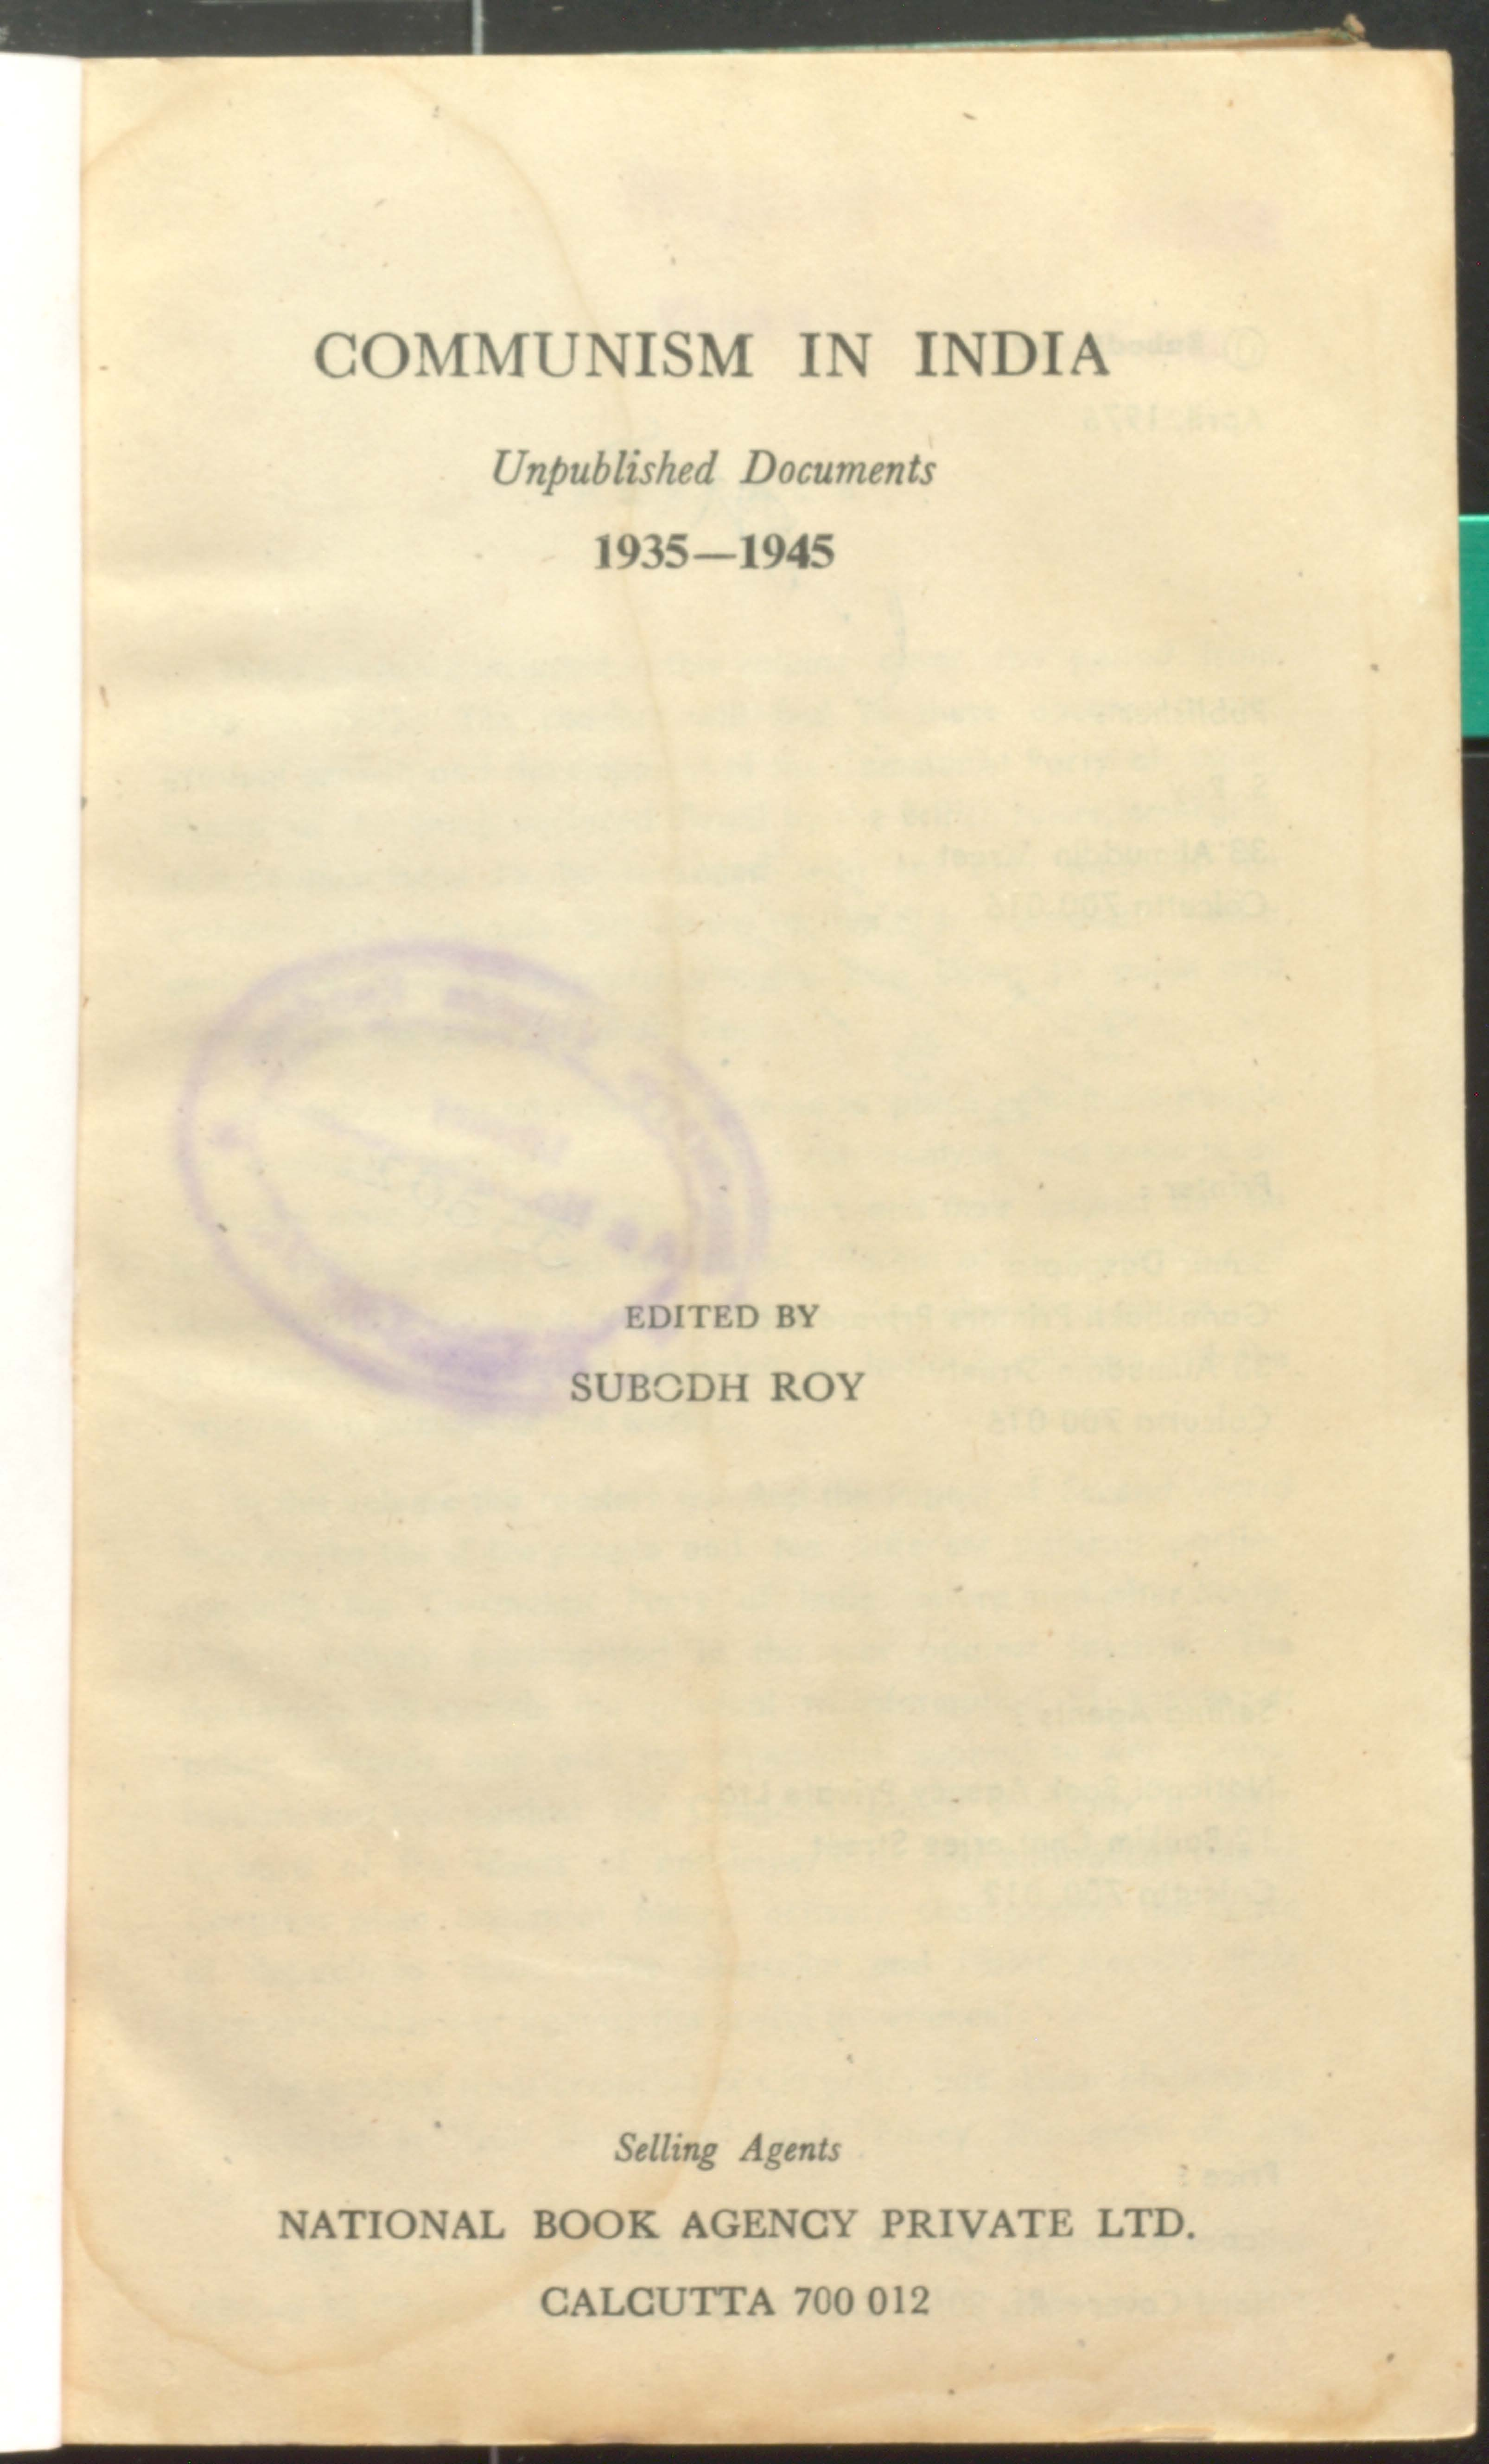 COMMUNISM IN INDIA  unpblished documents  1935-1945